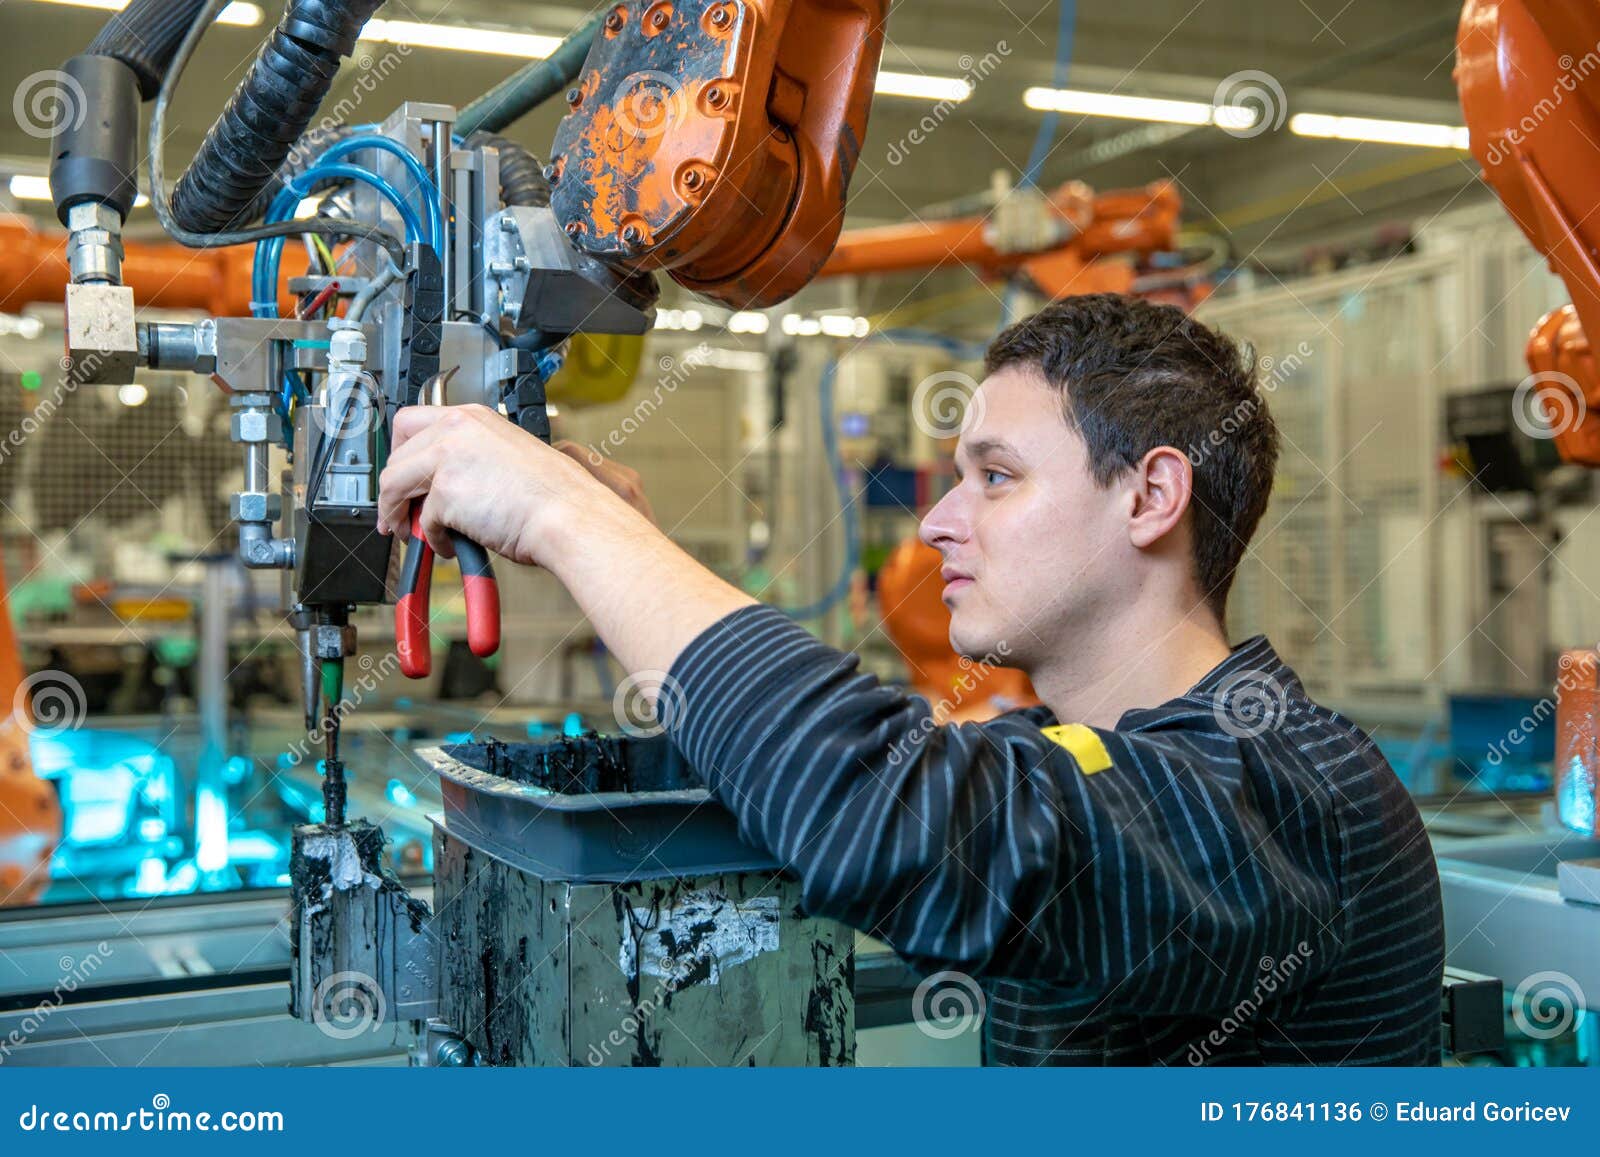 Jobs done by robots in a car factory